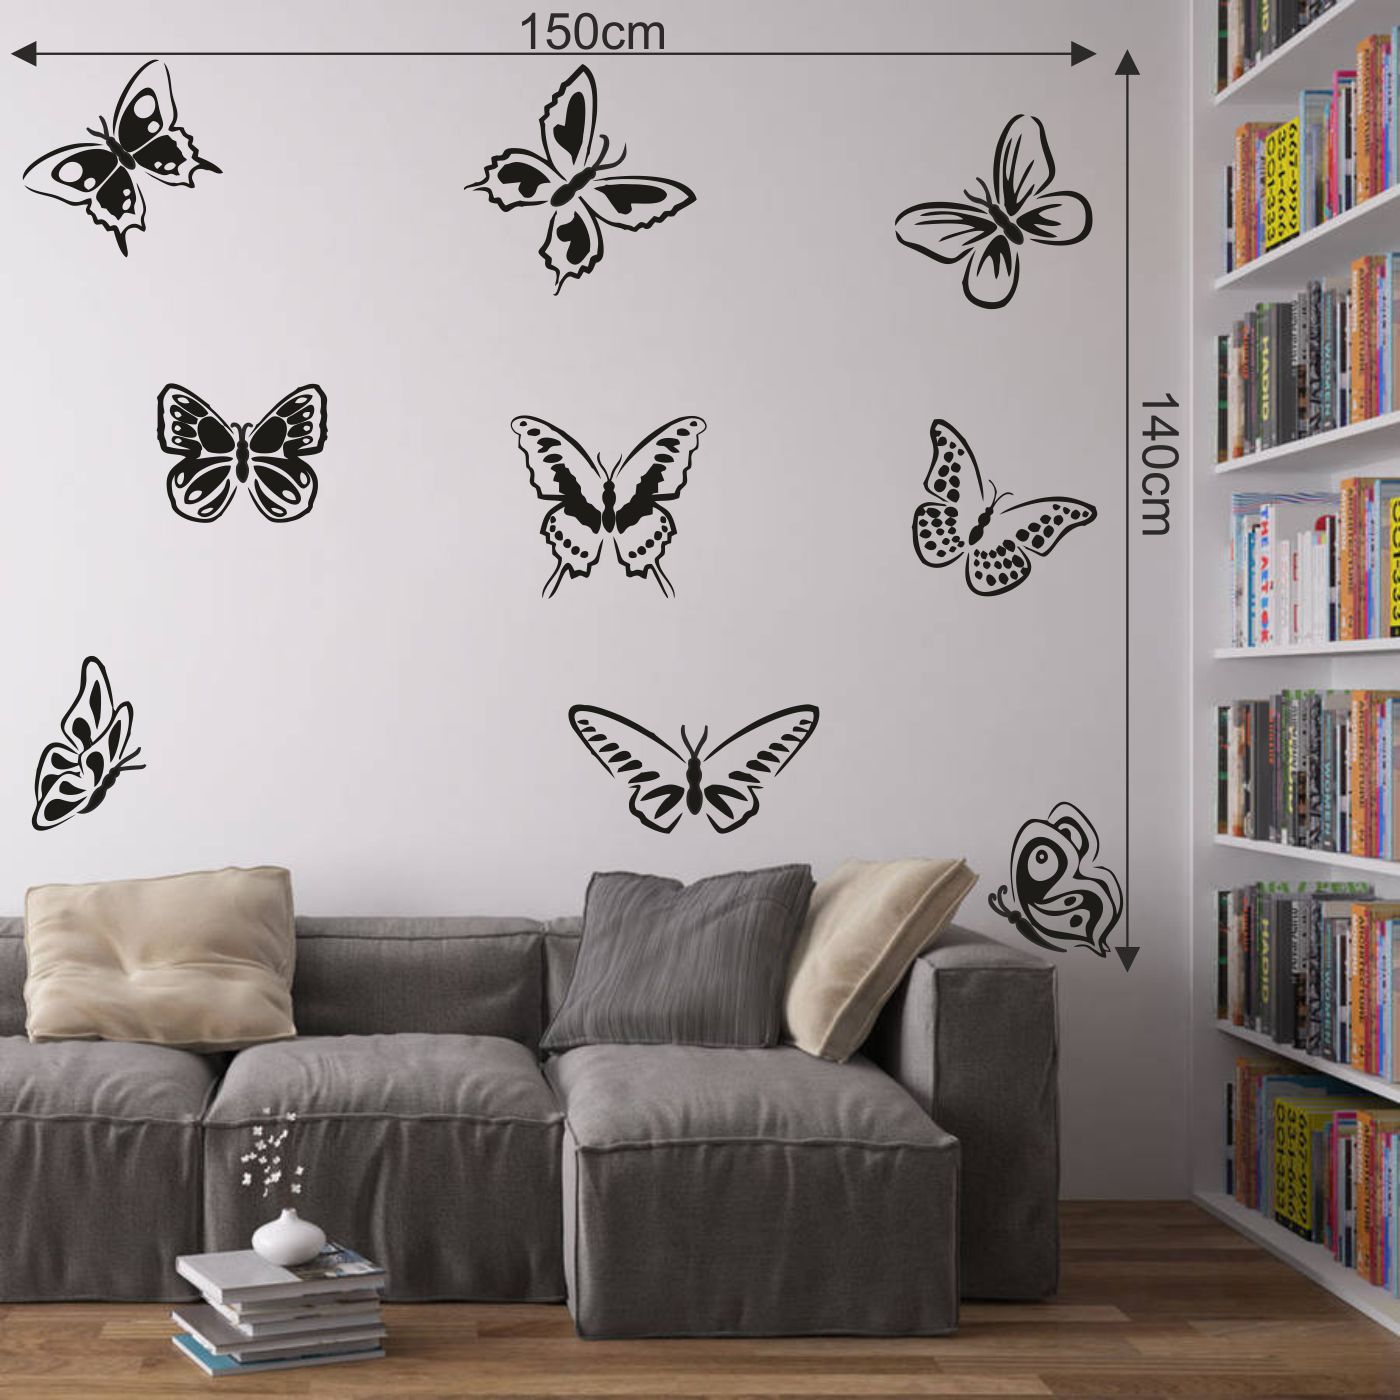 ORKA Butterfly Theme Wall Decal Sticker   16